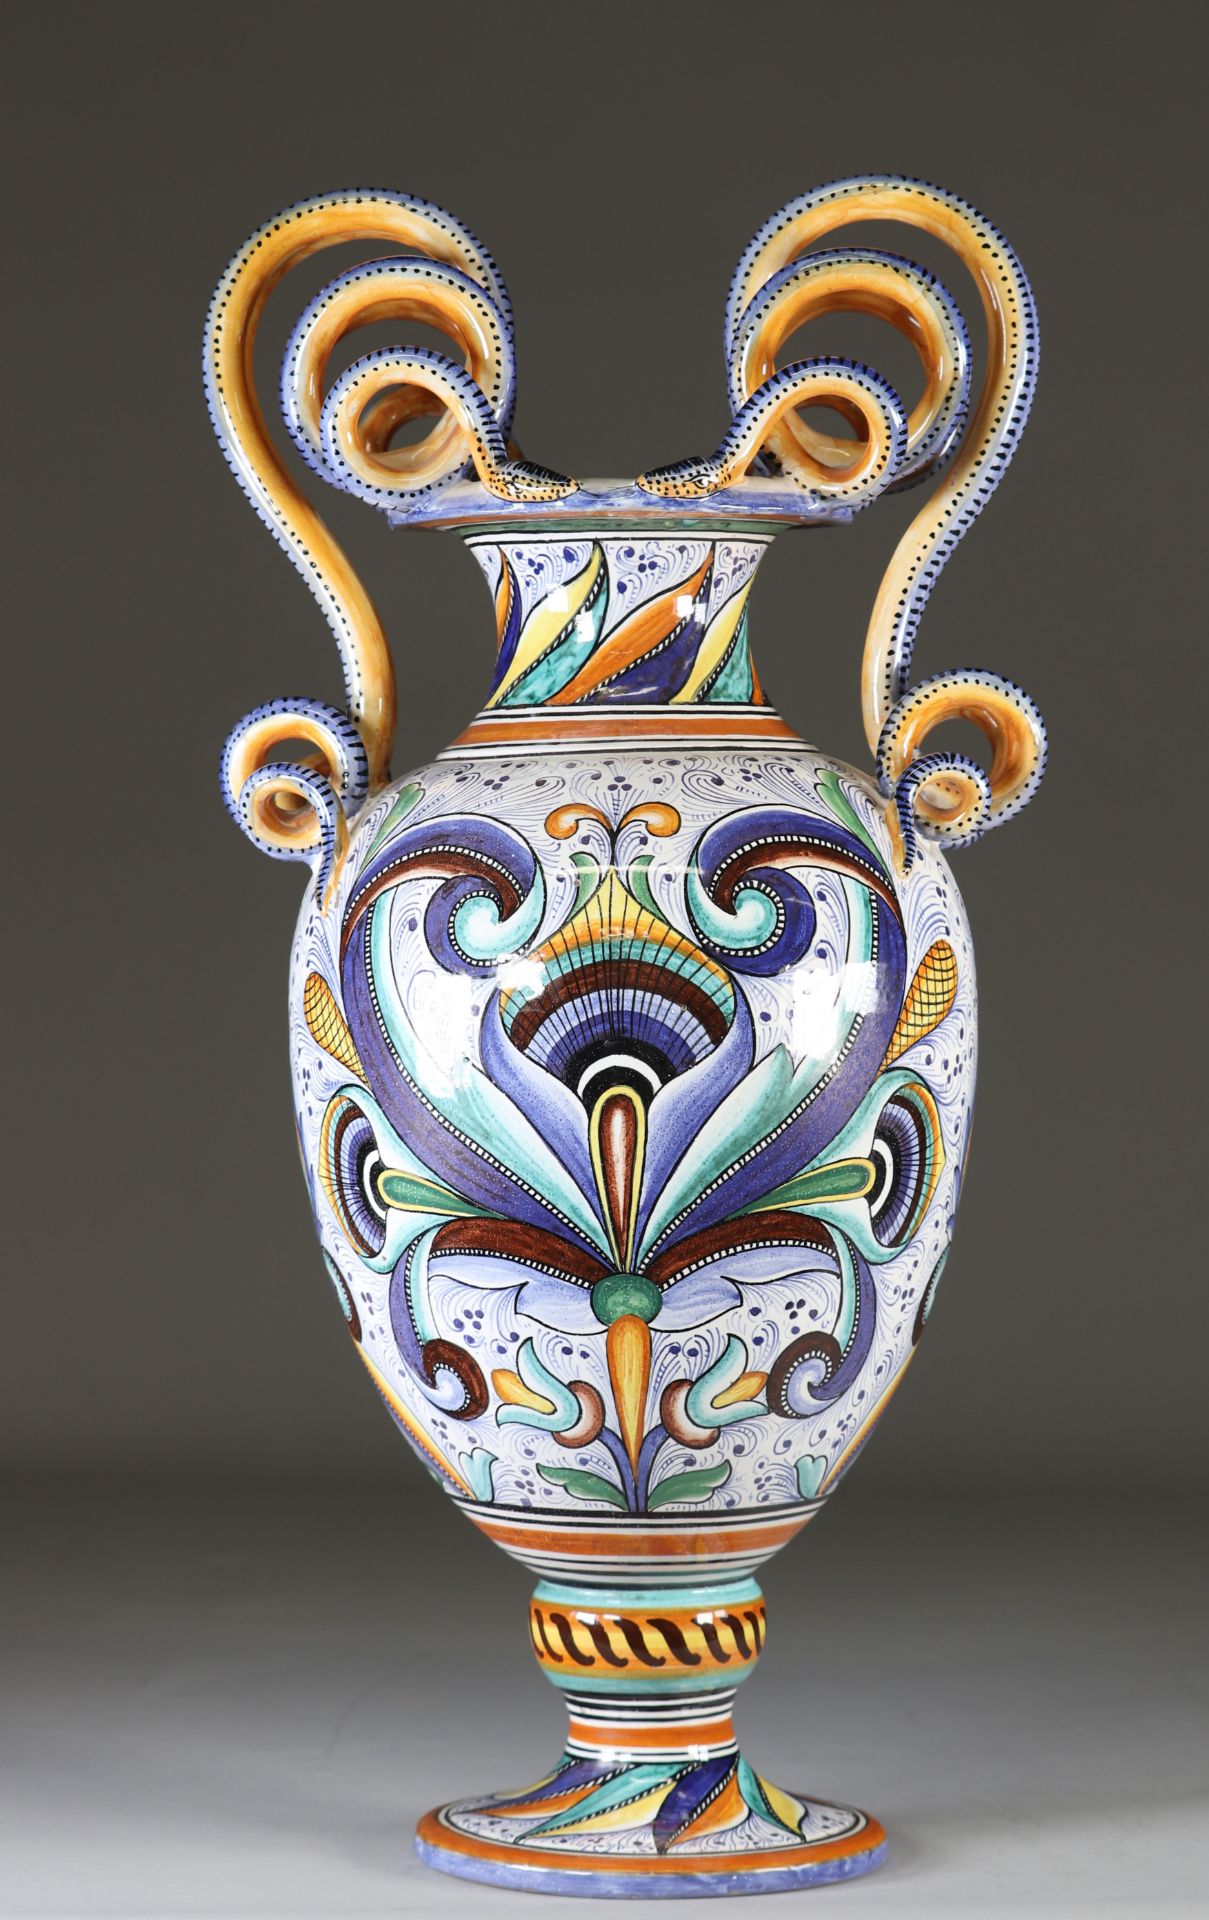 Large vase on pedestal with handles formed of majolica-style earthenware snakes - Image 3 of 4